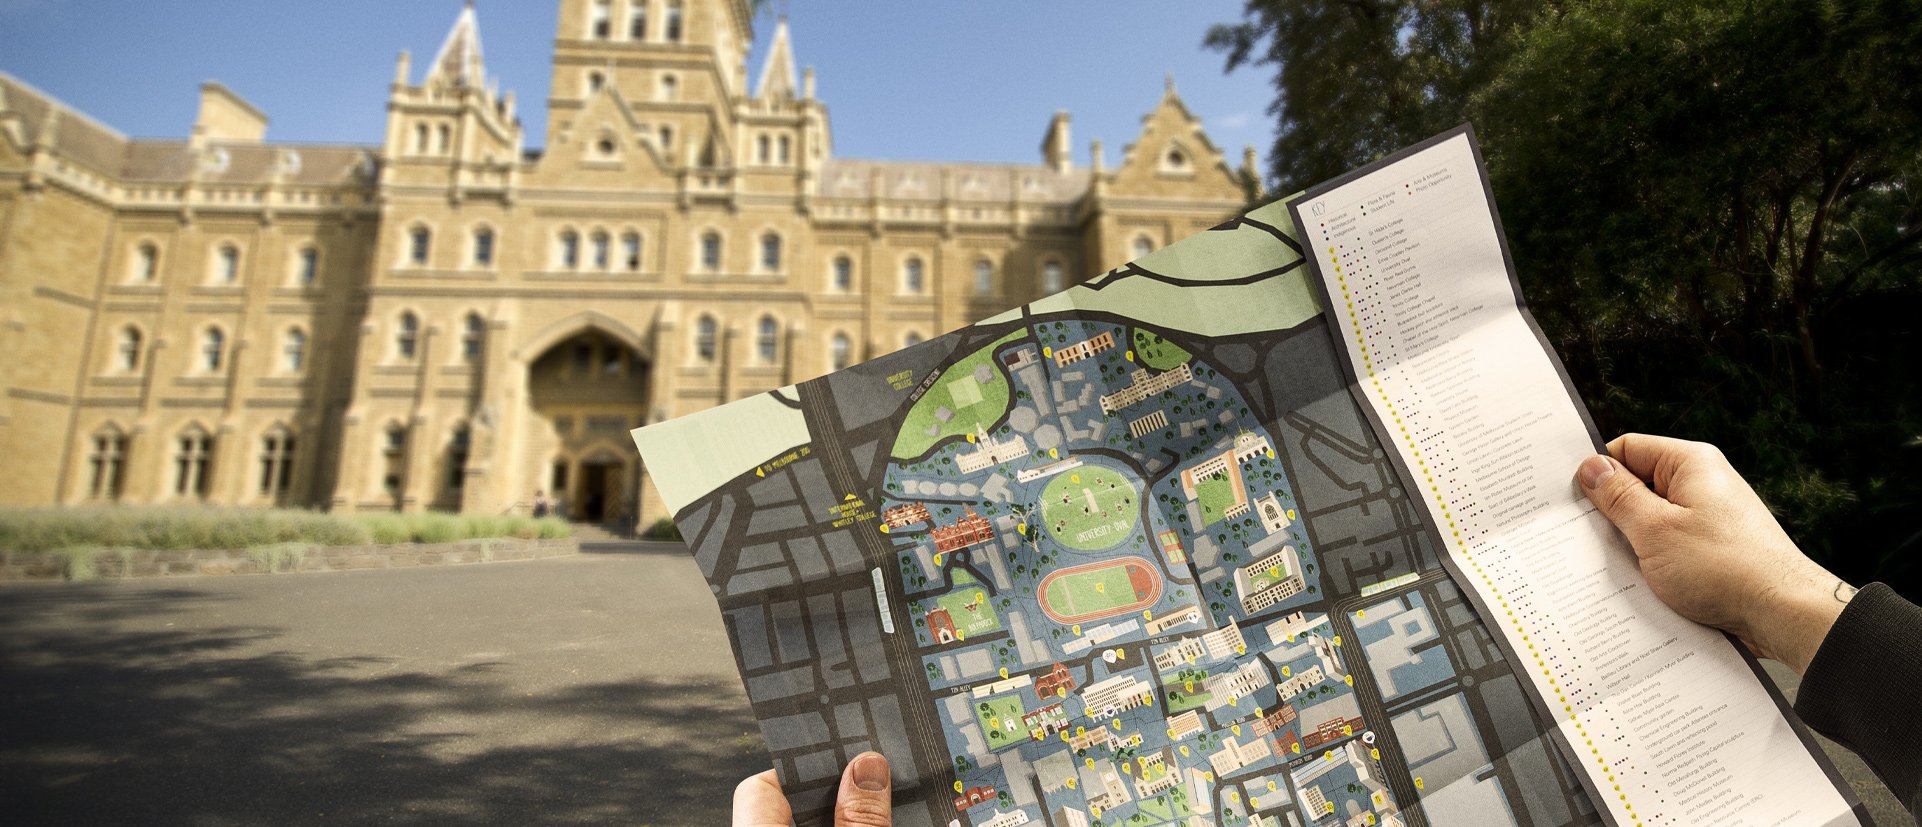 Tourist holds up a campus map outside a historic building.